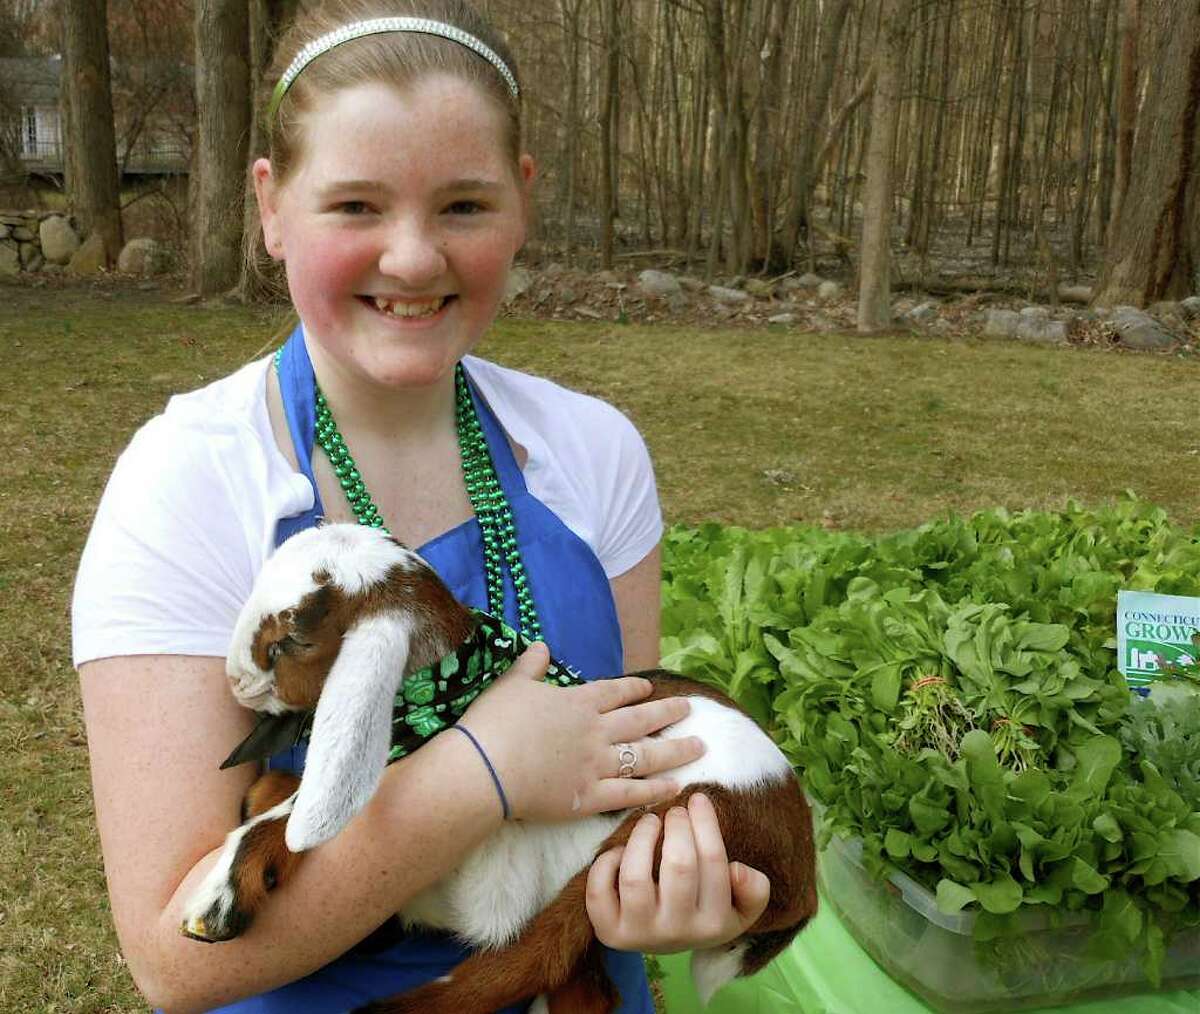 Anna Kimberly with a baby goat, Ada Oklahoma, from Butterfield Farm of East Granby on Saturday at Norfield Grange's Winter Farmers Market.